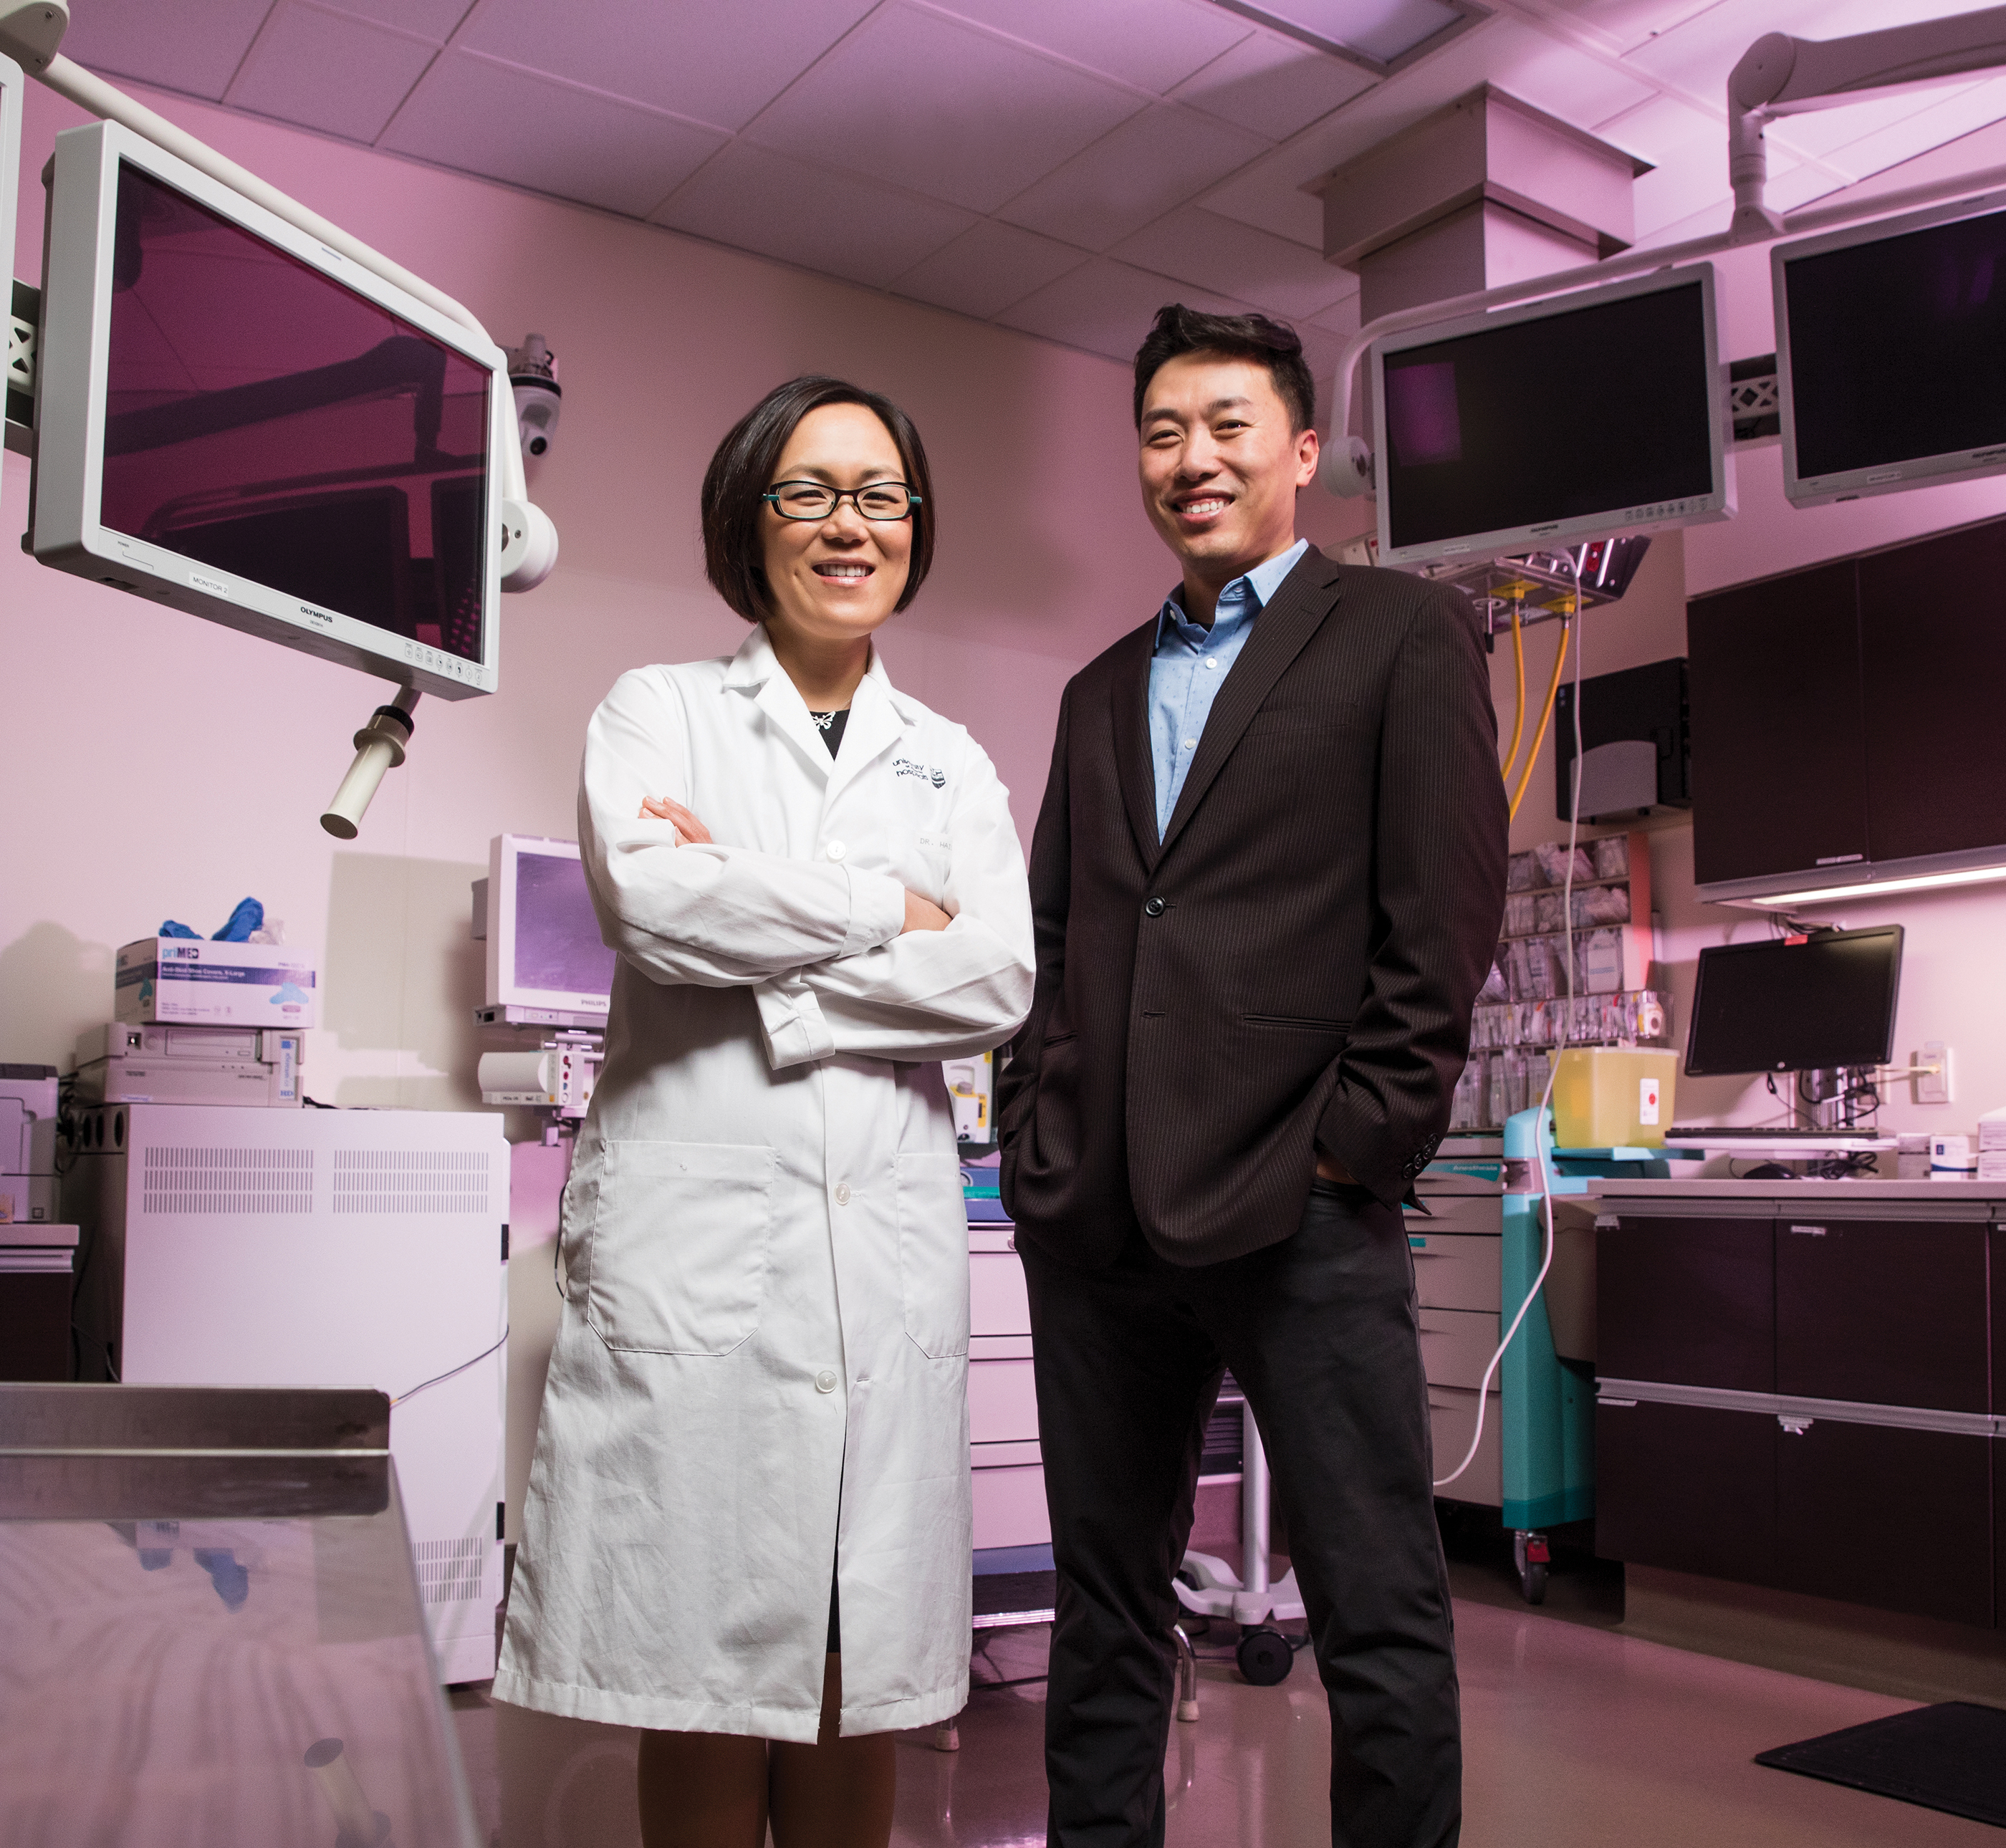 Haili Wang and David Chang, CEO of Metabolomics Technologies Inc., are improving cancer detection and prevention with the commercialization of a metabolomic urine test for colorectal cancer.